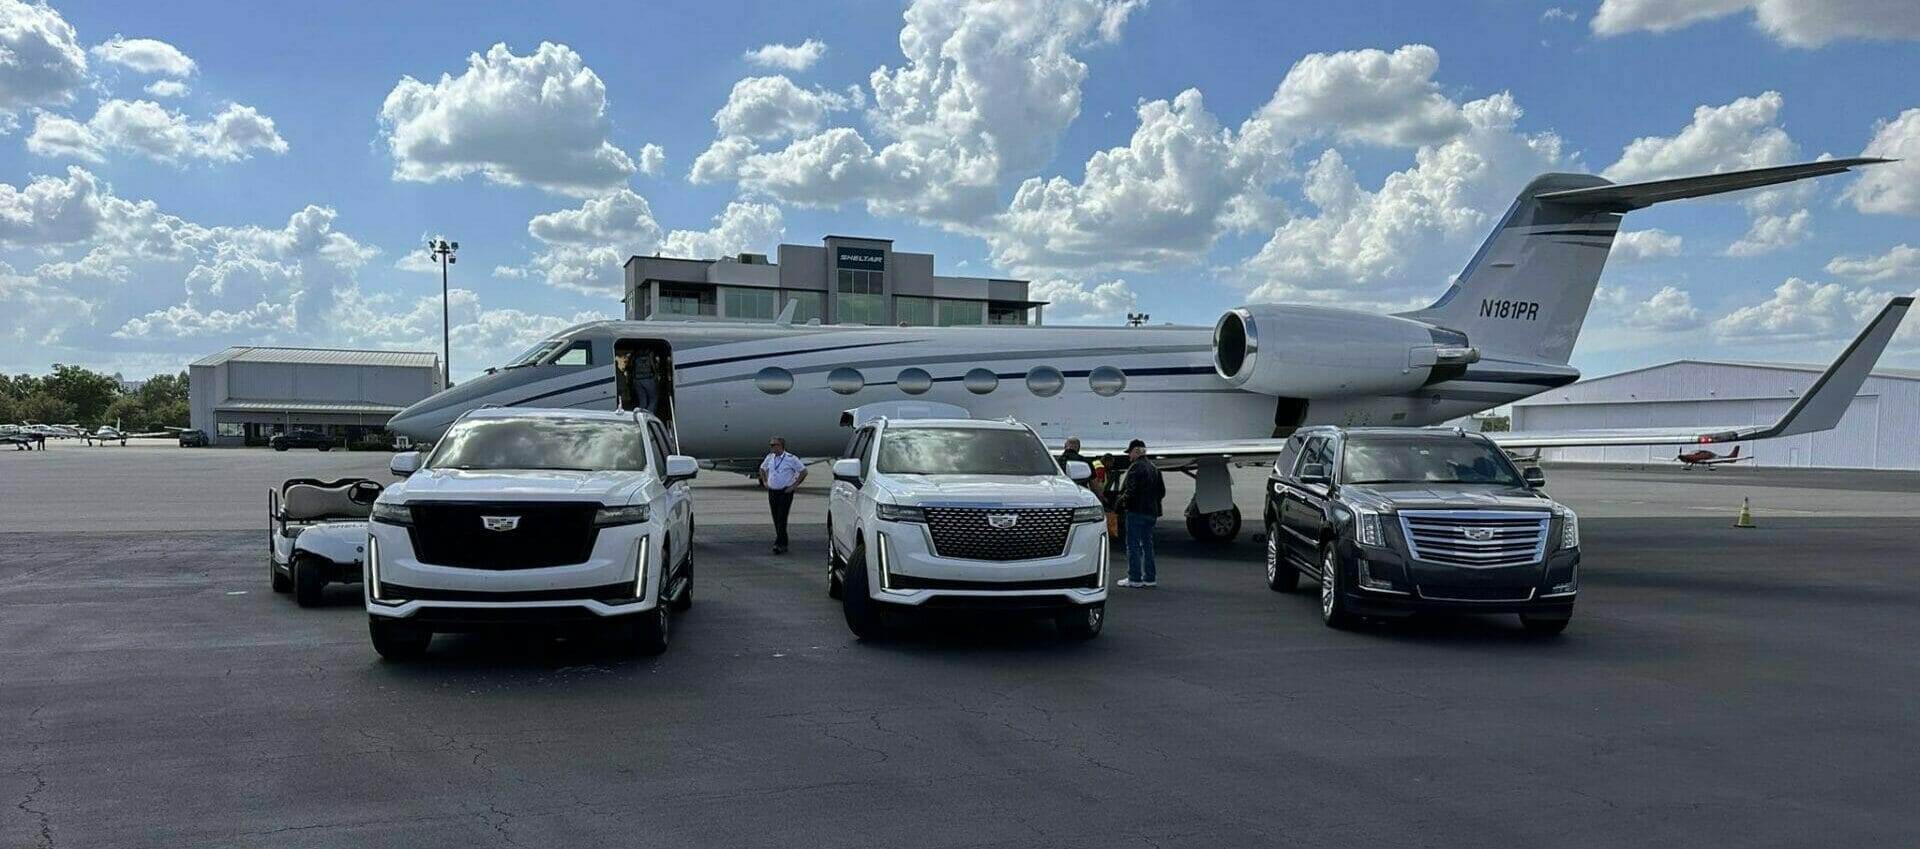 Private jet parked on tarmac with two luxury limousines and several individuals standing nearby.